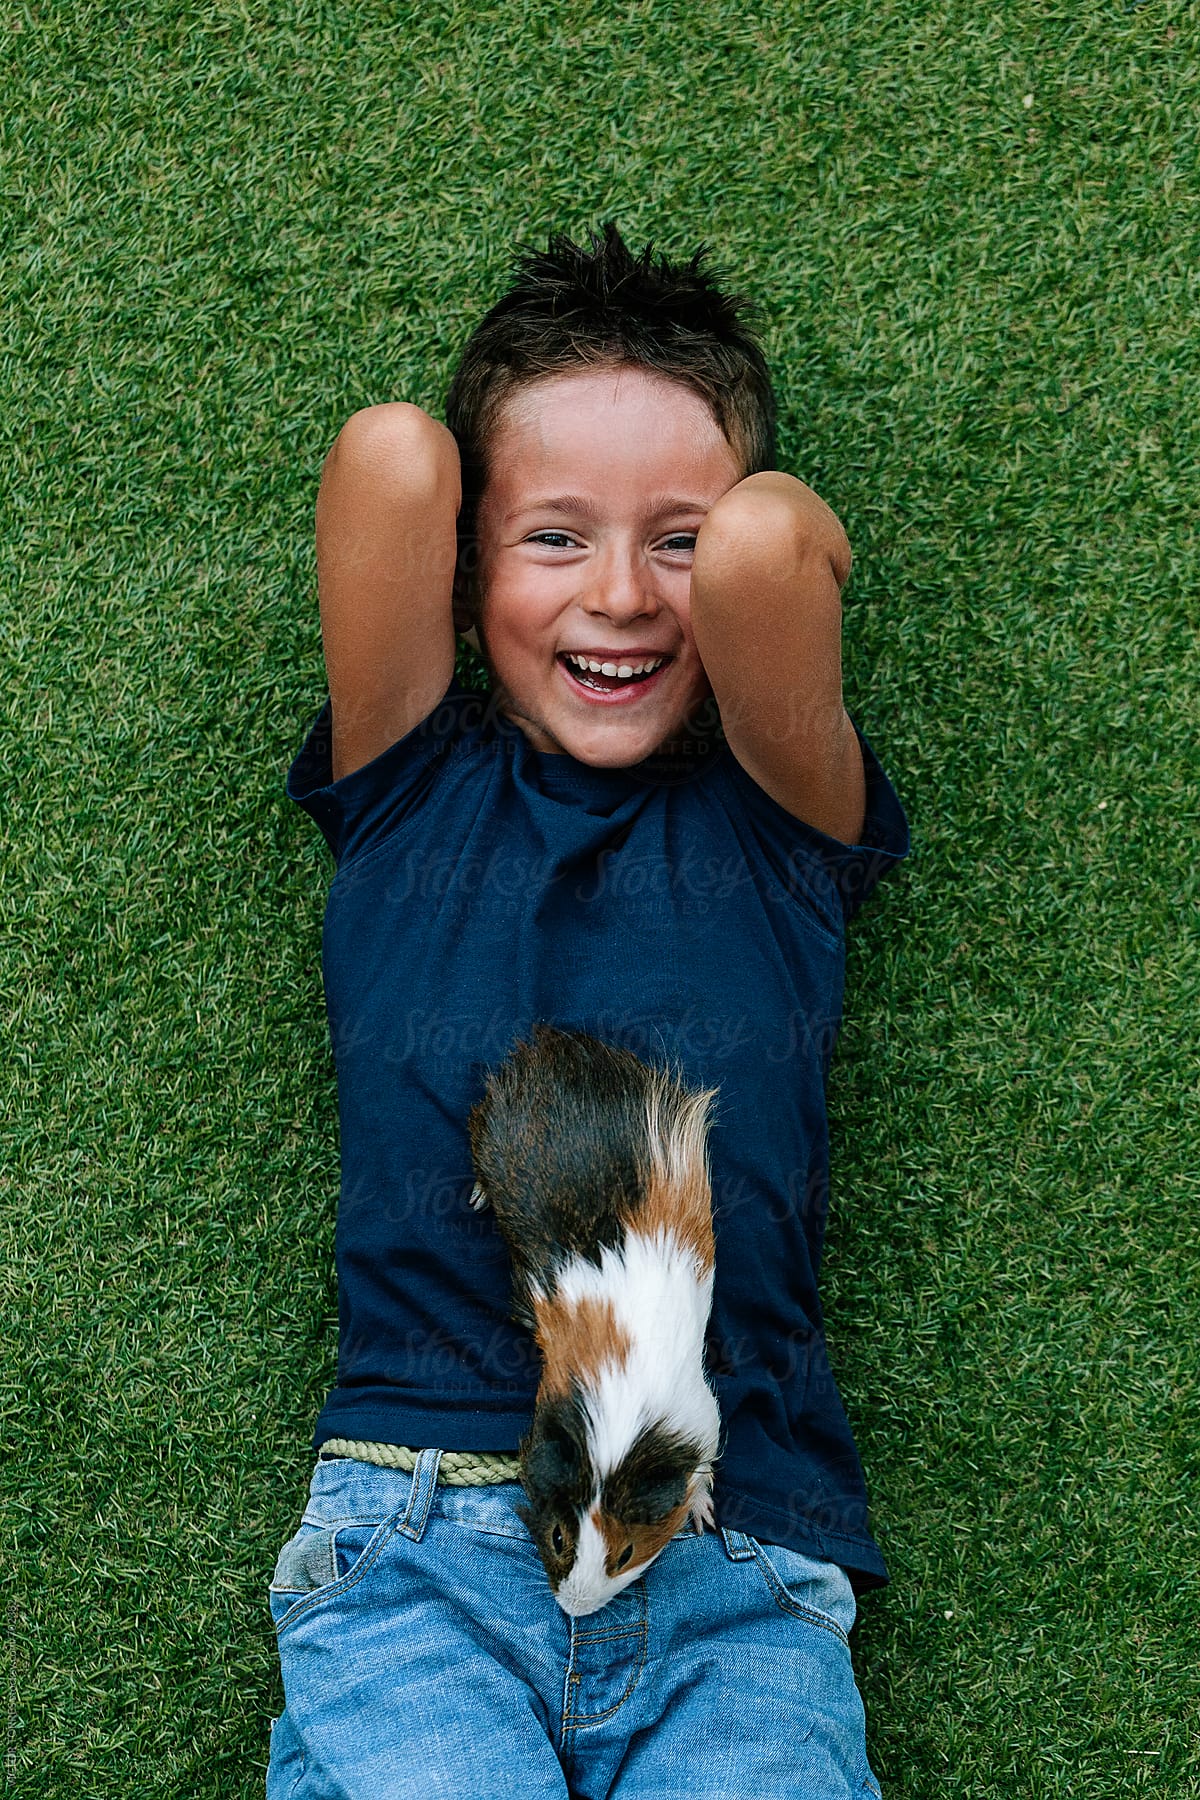 Cute Kid Playing with a Guinea Pig Lying on Grass